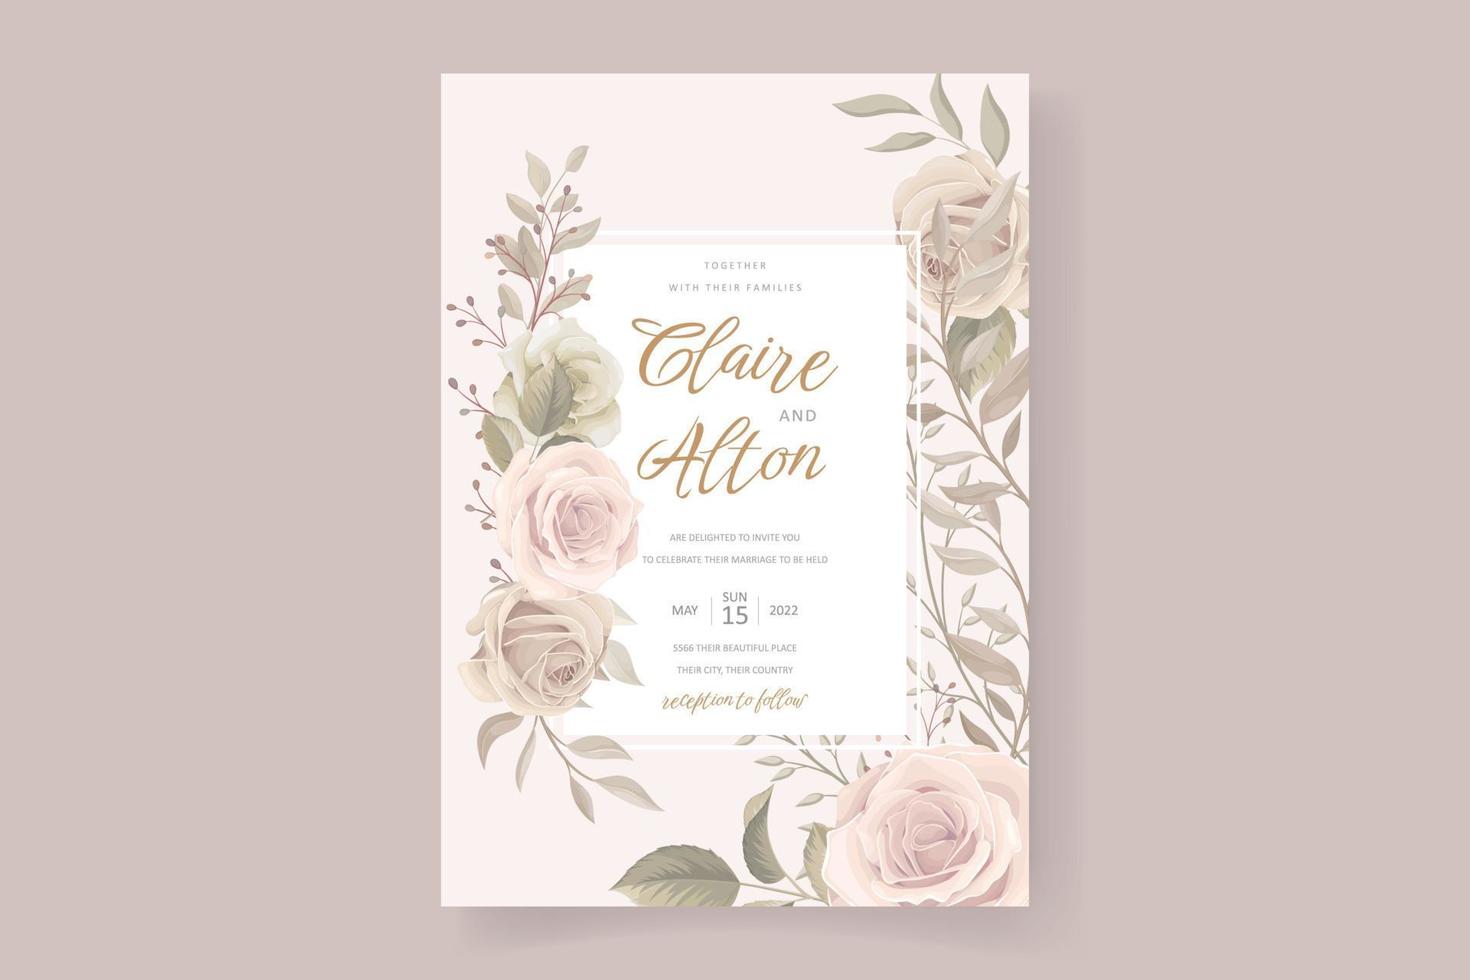 Wedding invitation template set with floral and leaves decoration vector